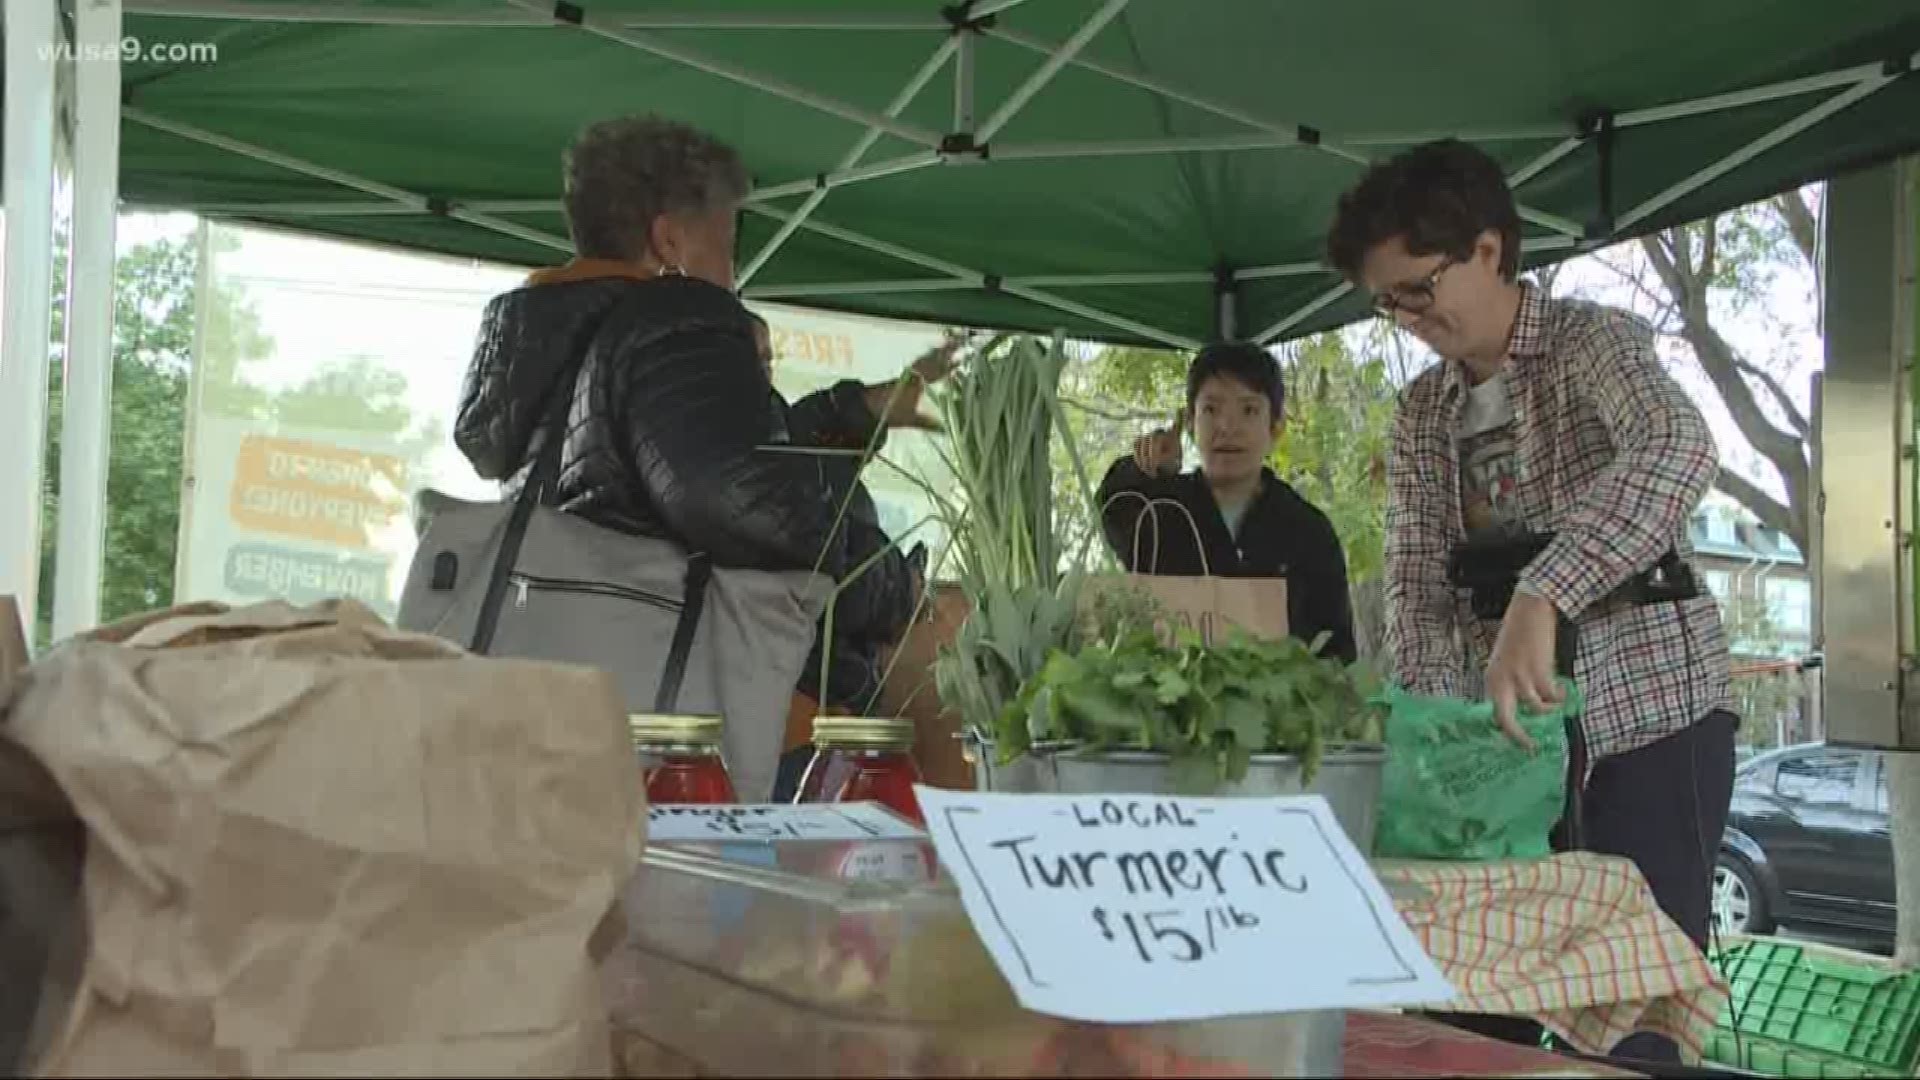 Once a week, communities that struggle to find healthy, fresh food get it delivered -- via a farmer's market on wheels.